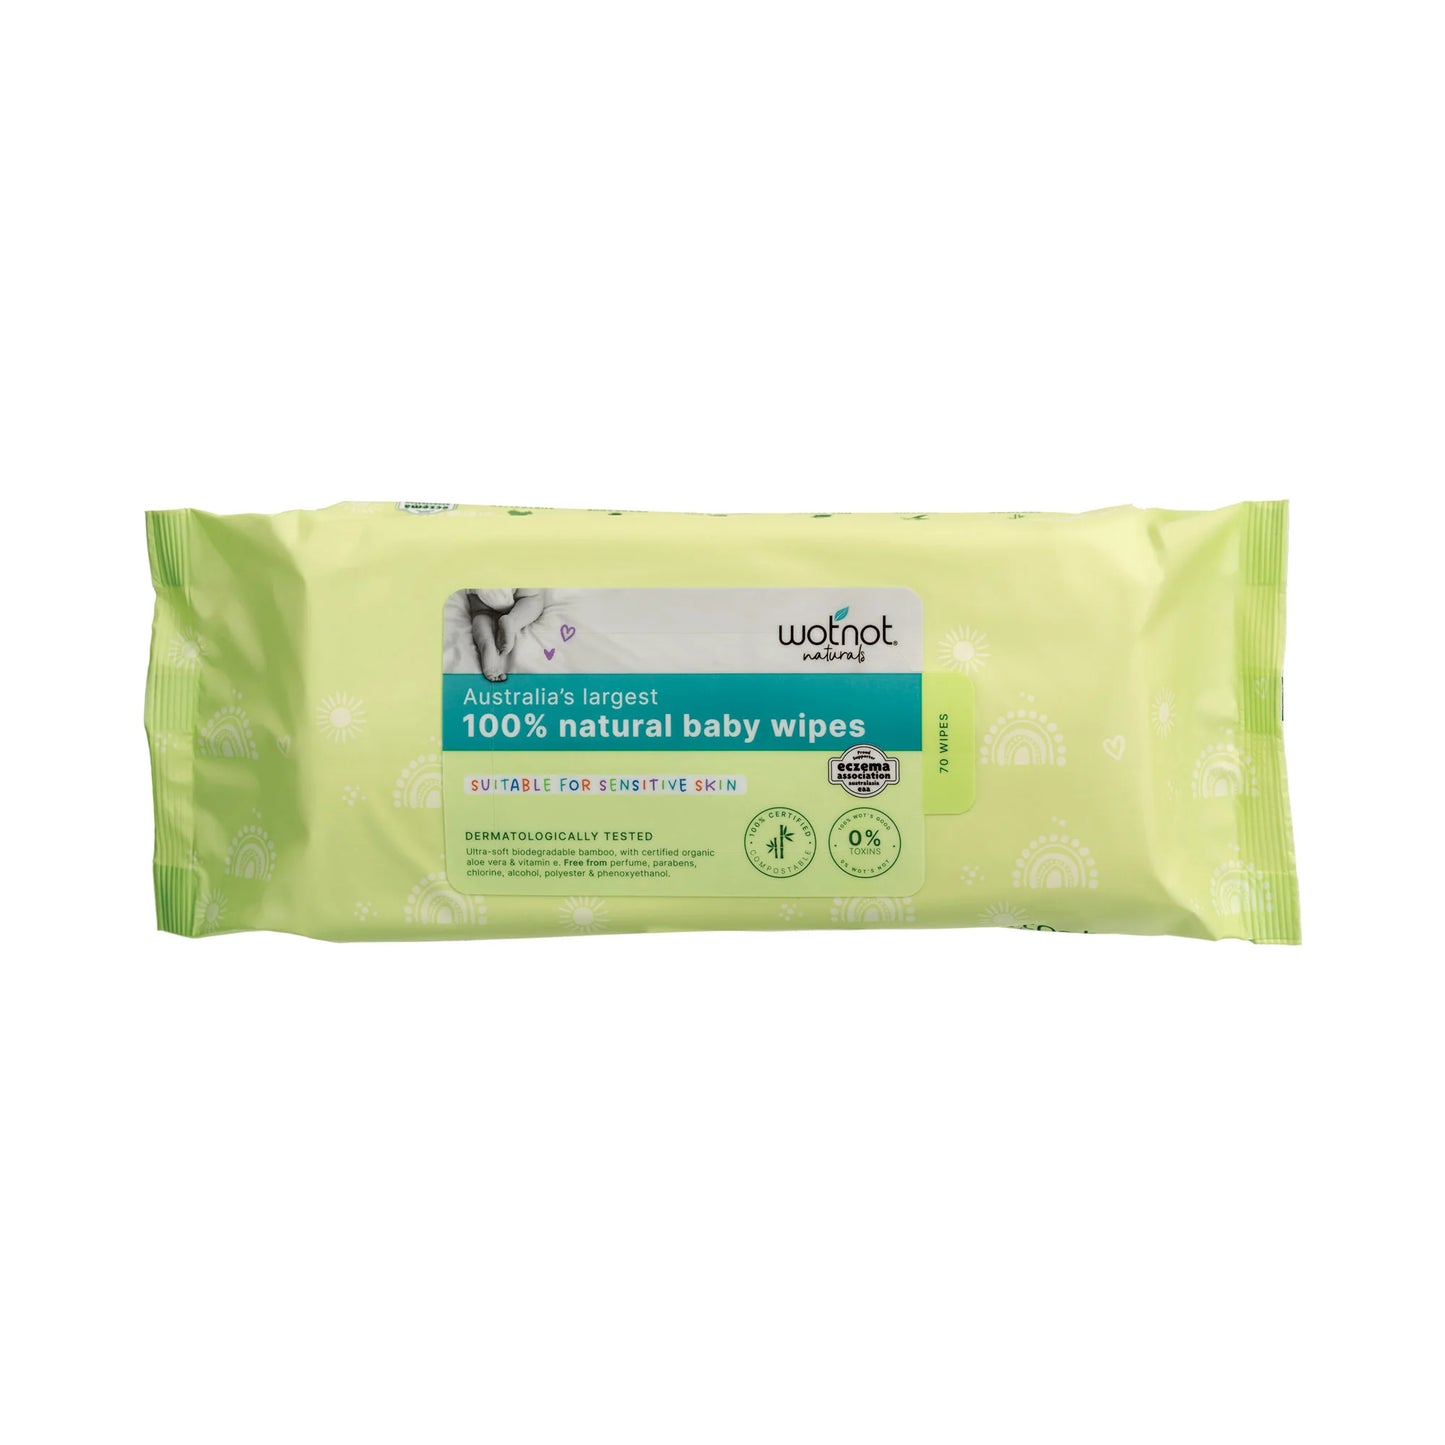 Wotnot 100% Natural Baby Wipes 70pk